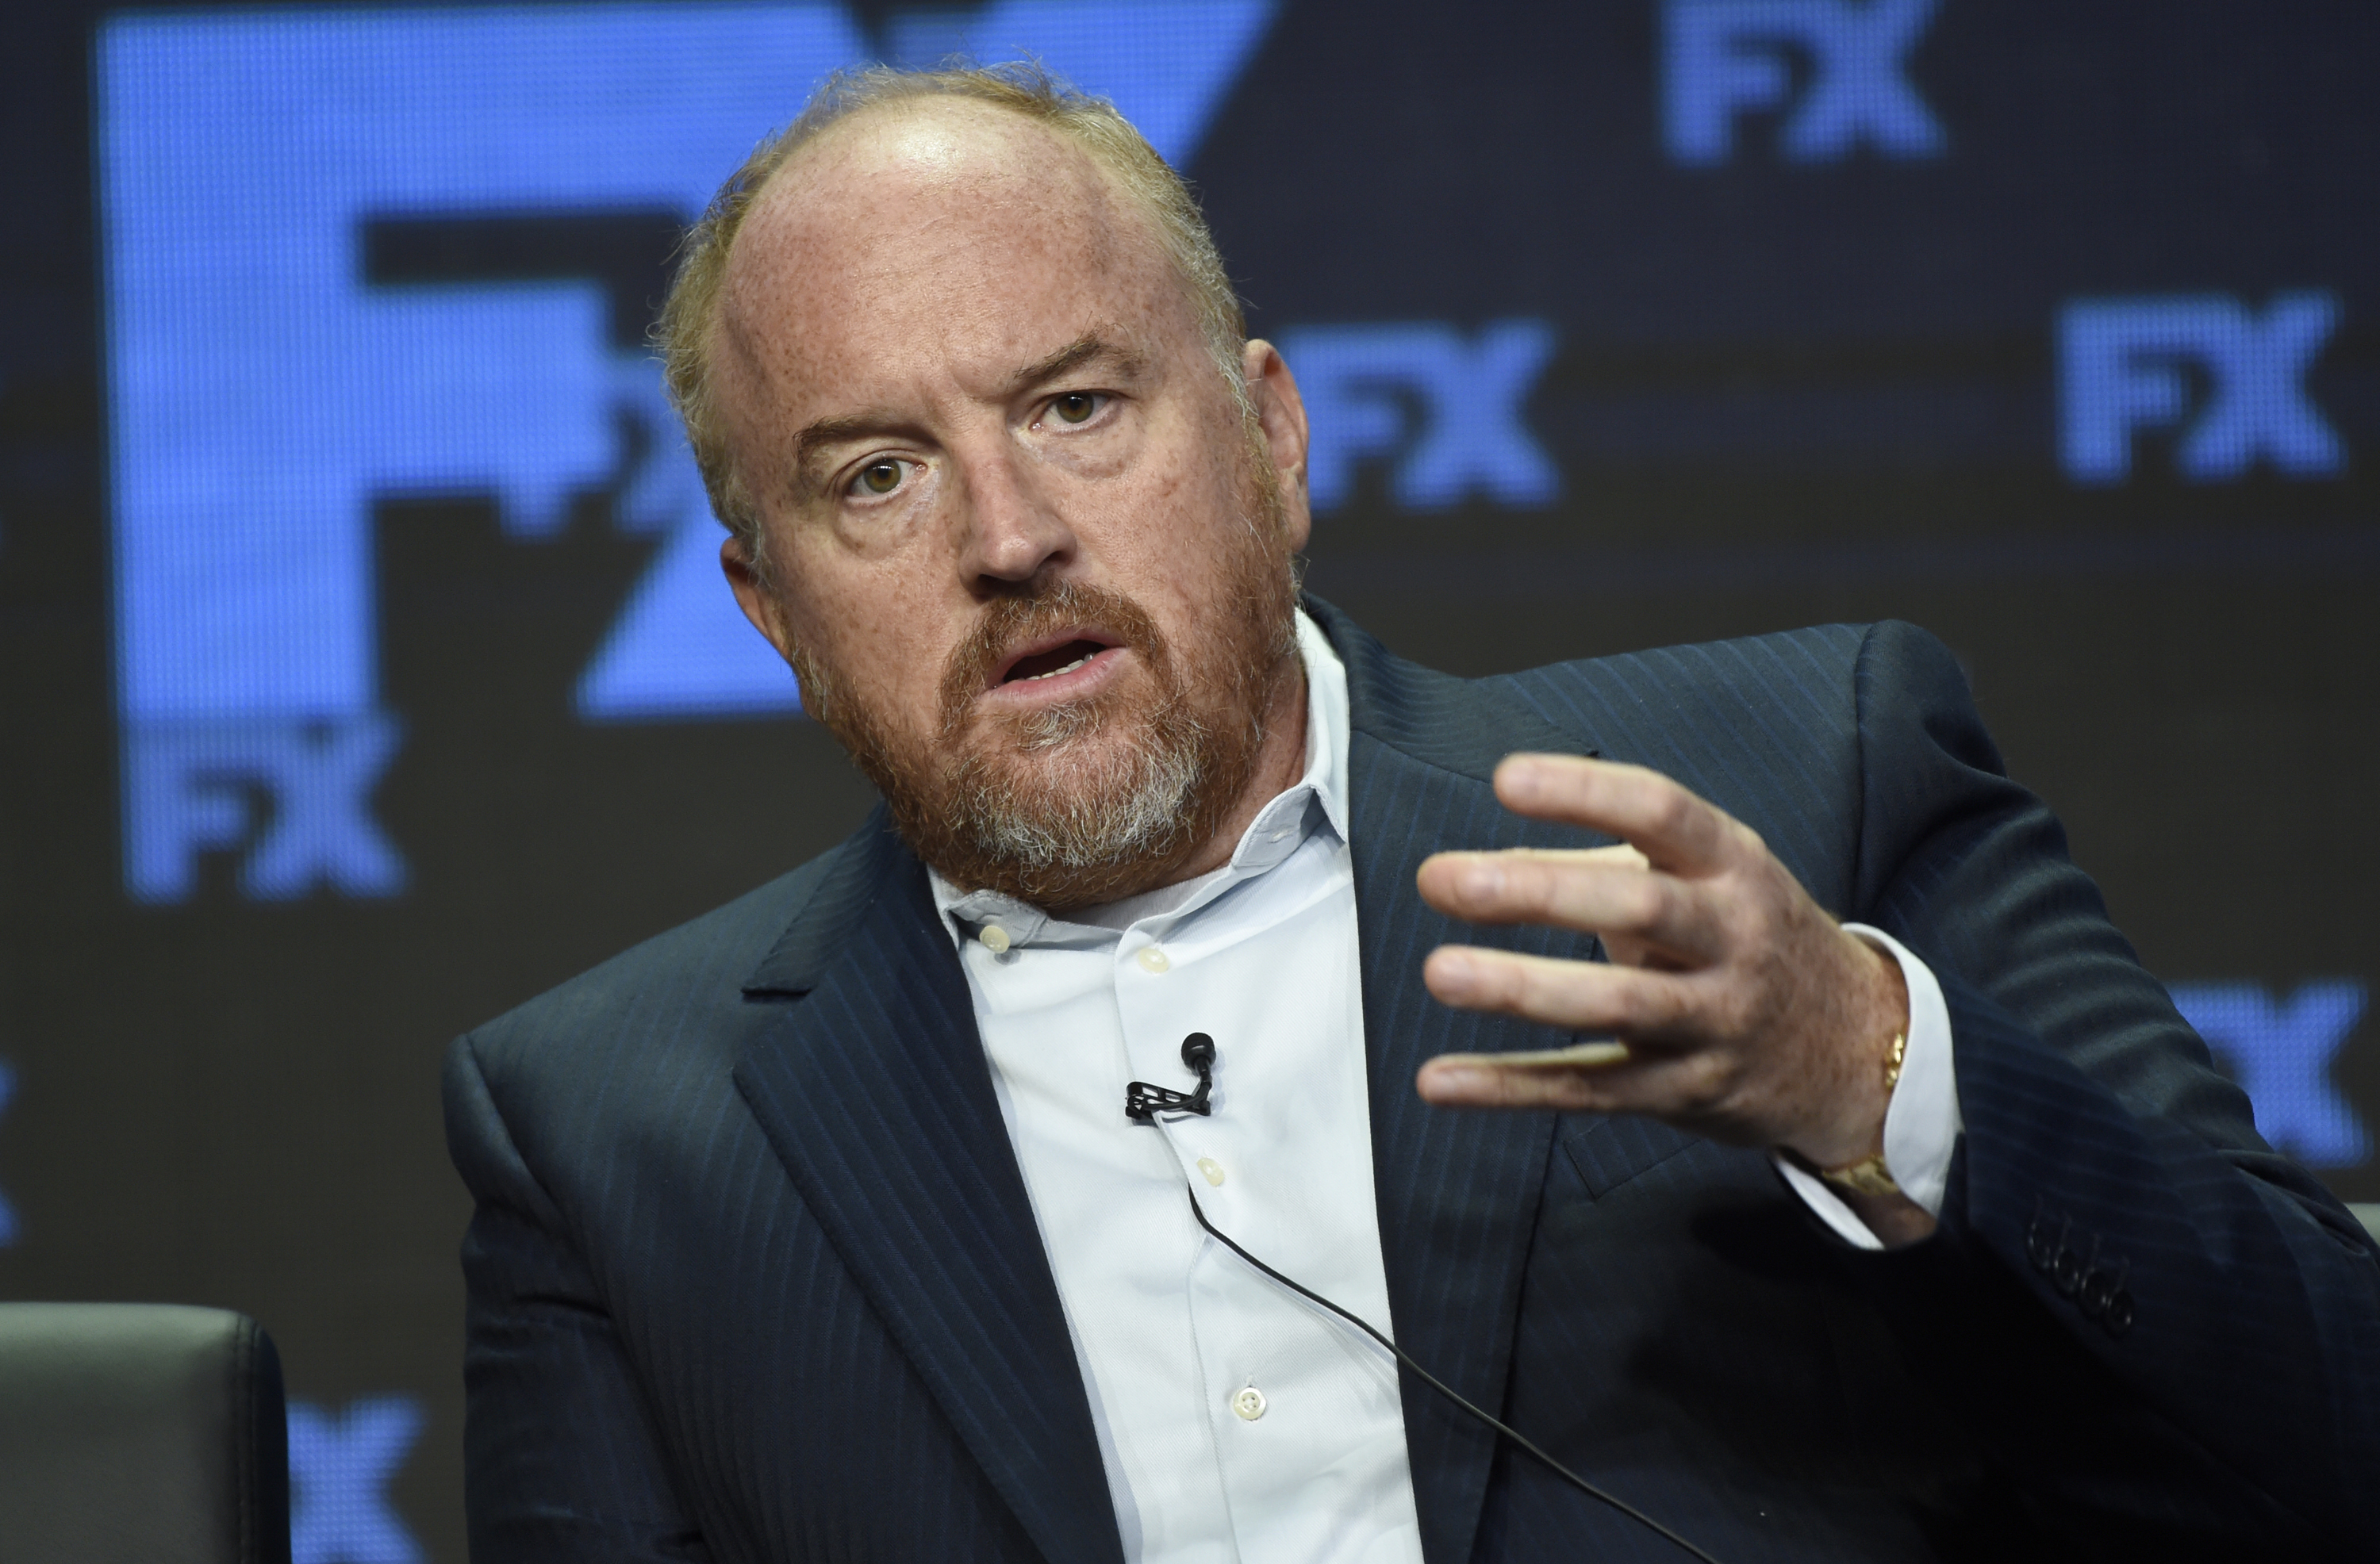 SNL' Airs Ad for Louis C.K.'s New Stand-Up Special, 'Sorry